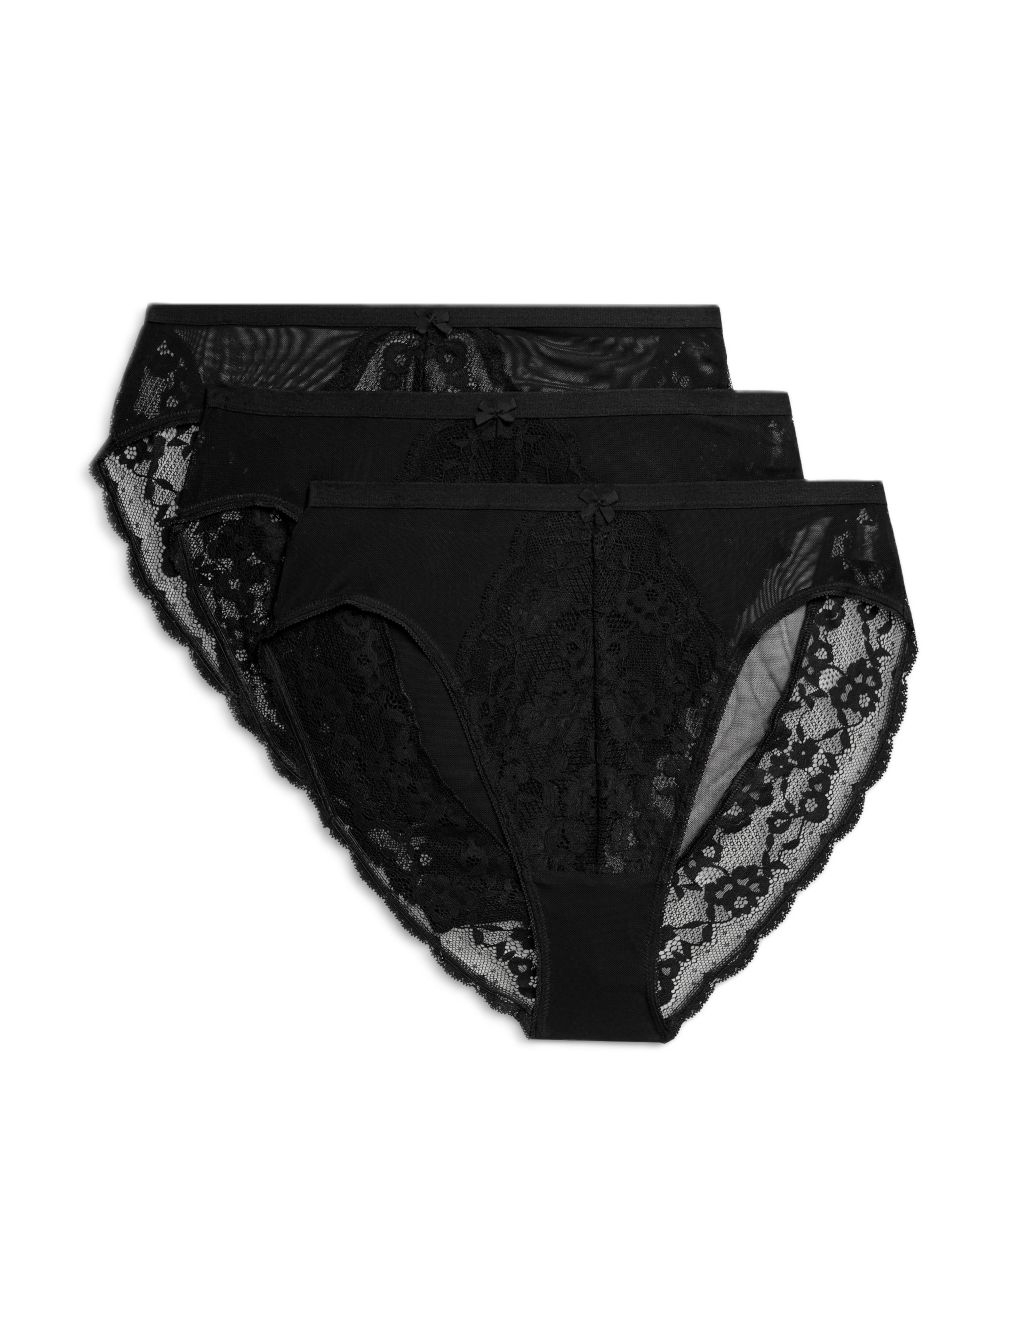 High-Waisted Multi-Pack Knickers